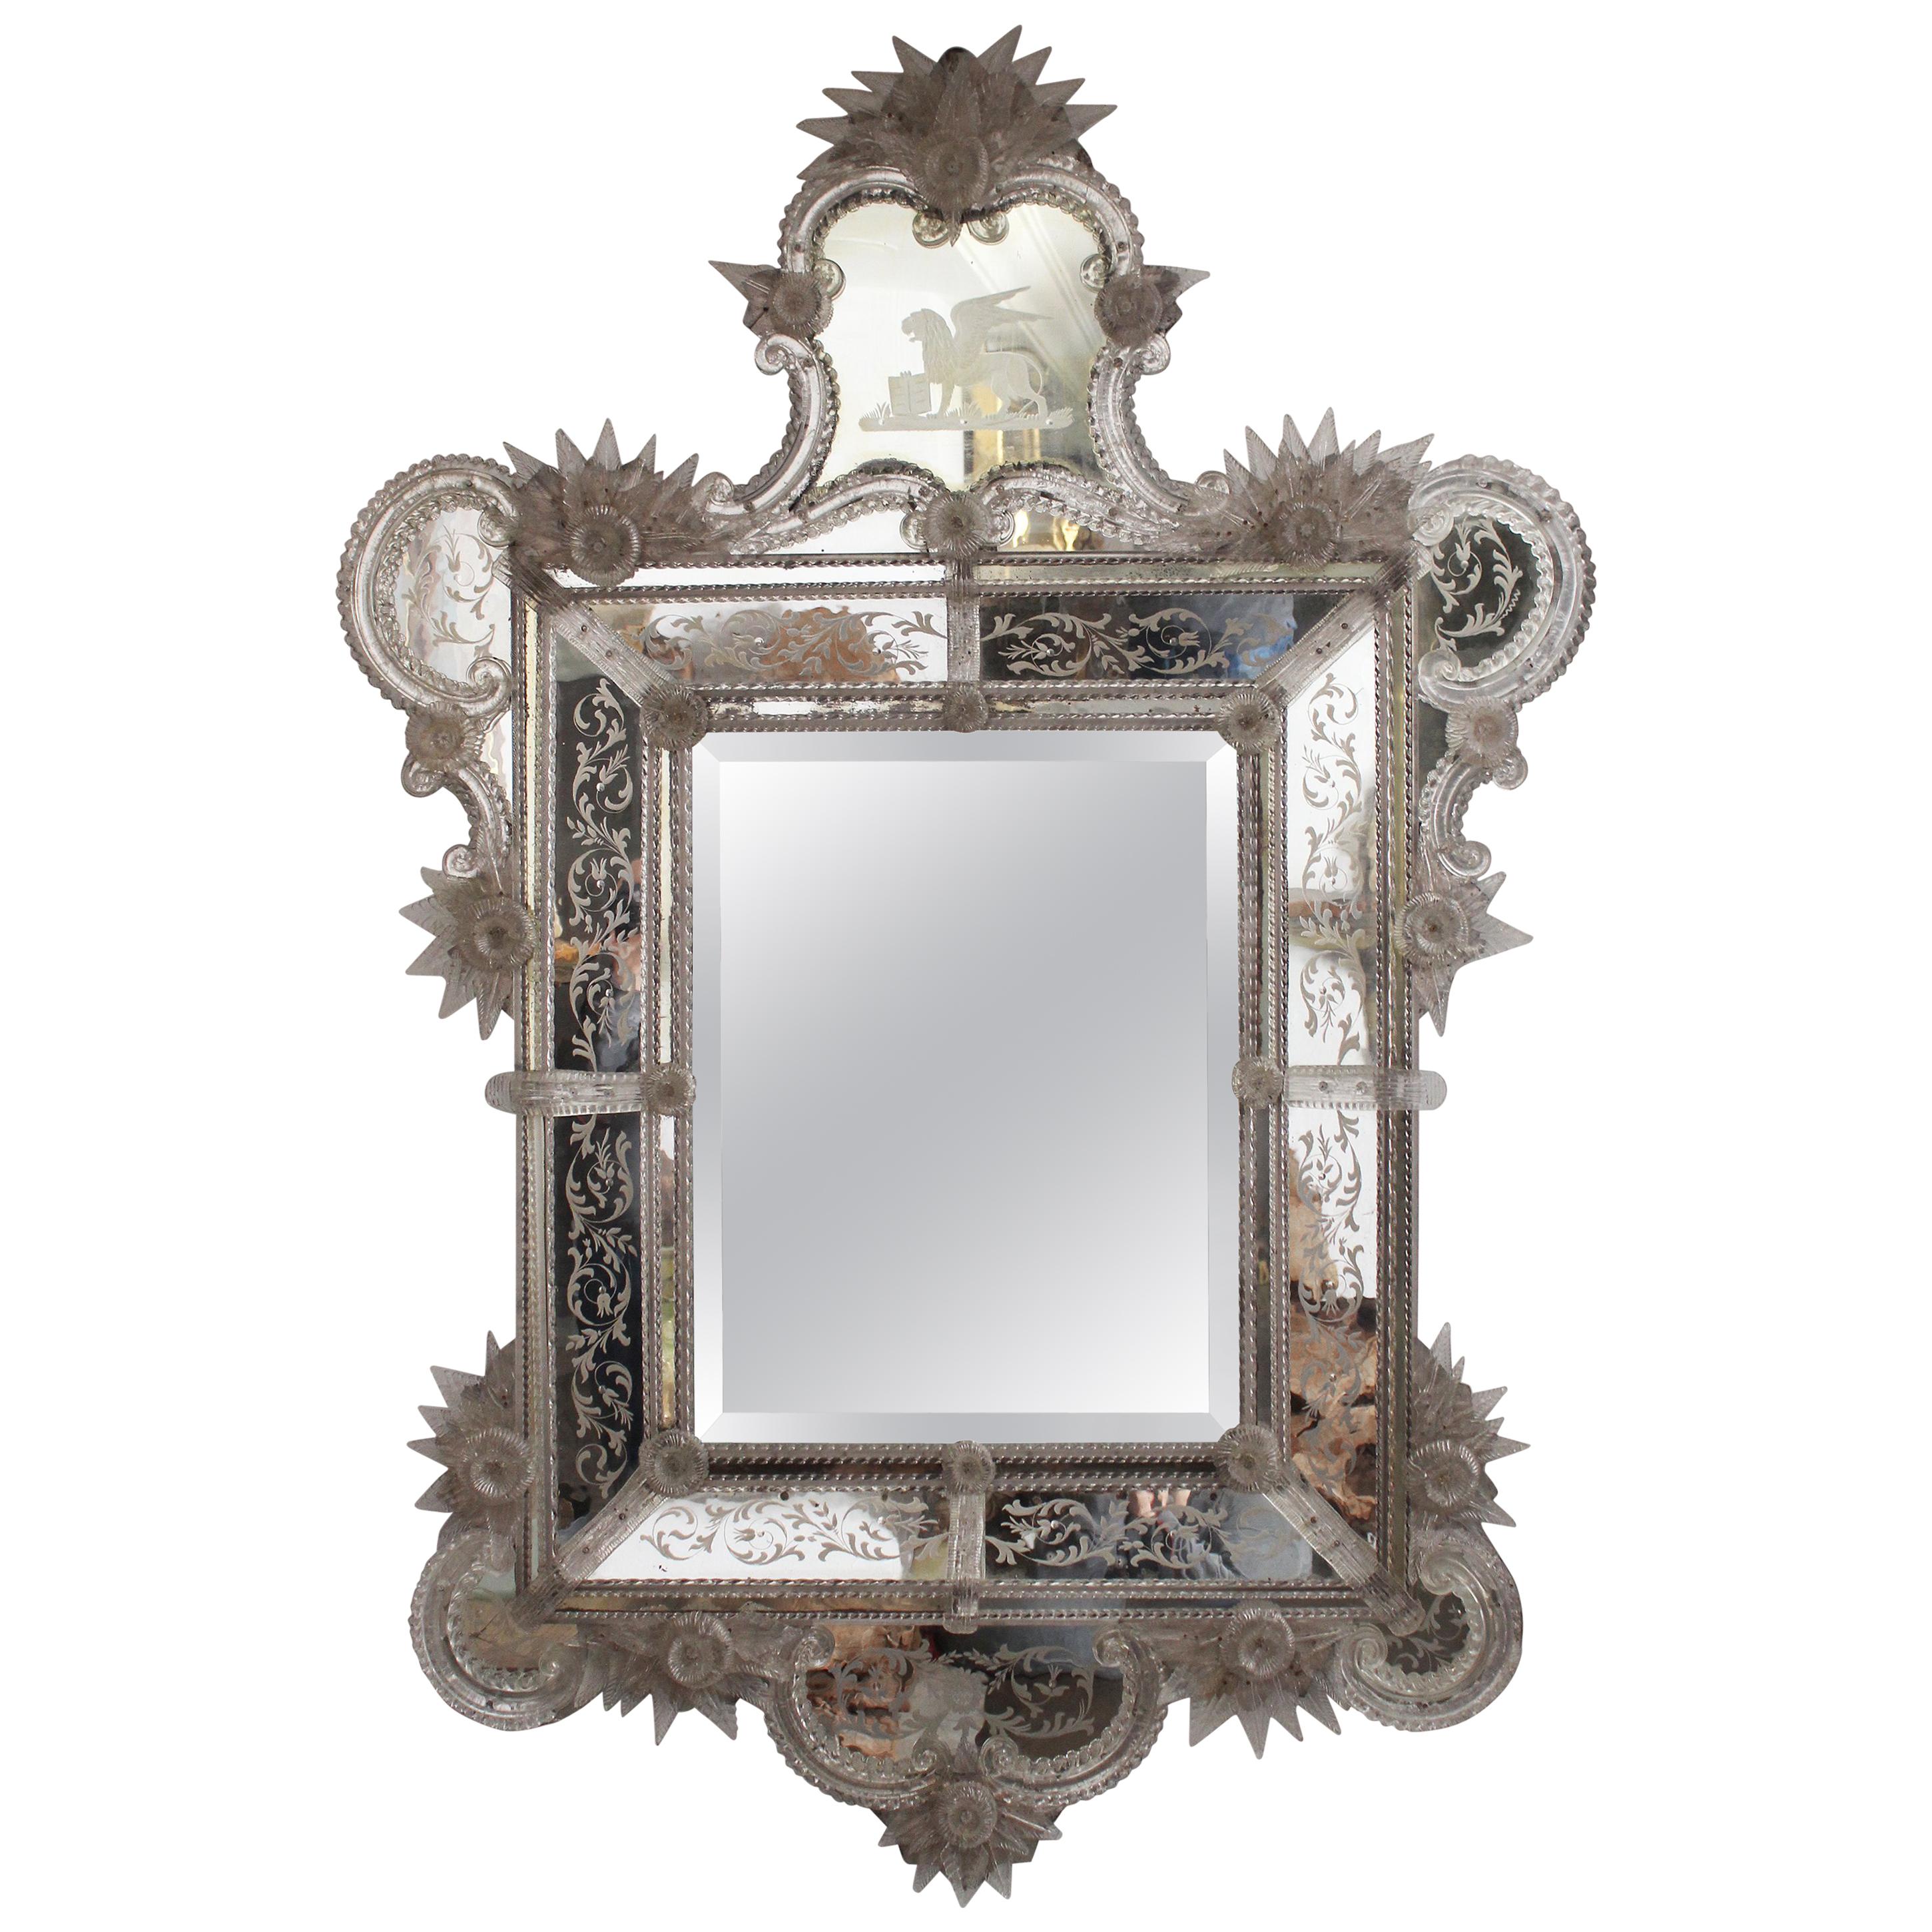 19th Century Venetian Mirror Profusely Decorated with Floral Motifs